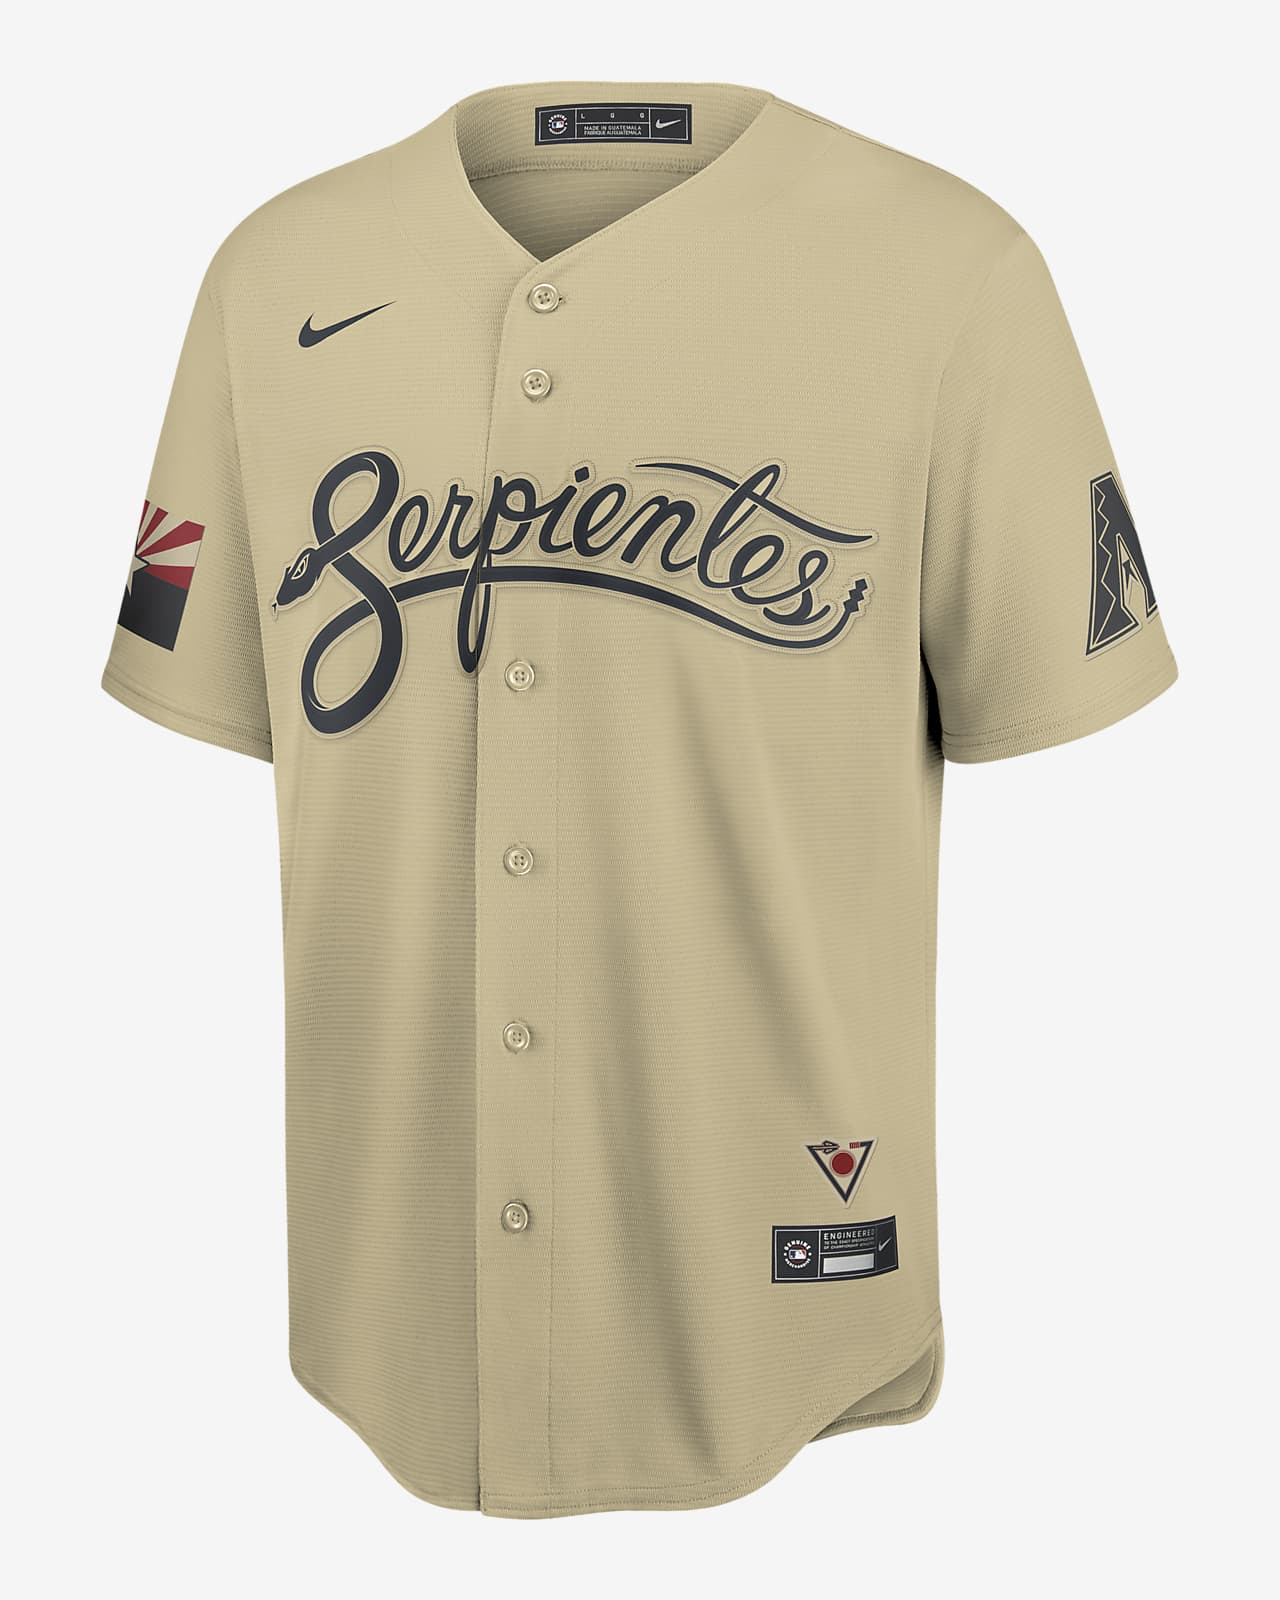 nikeconnect jersey mlb